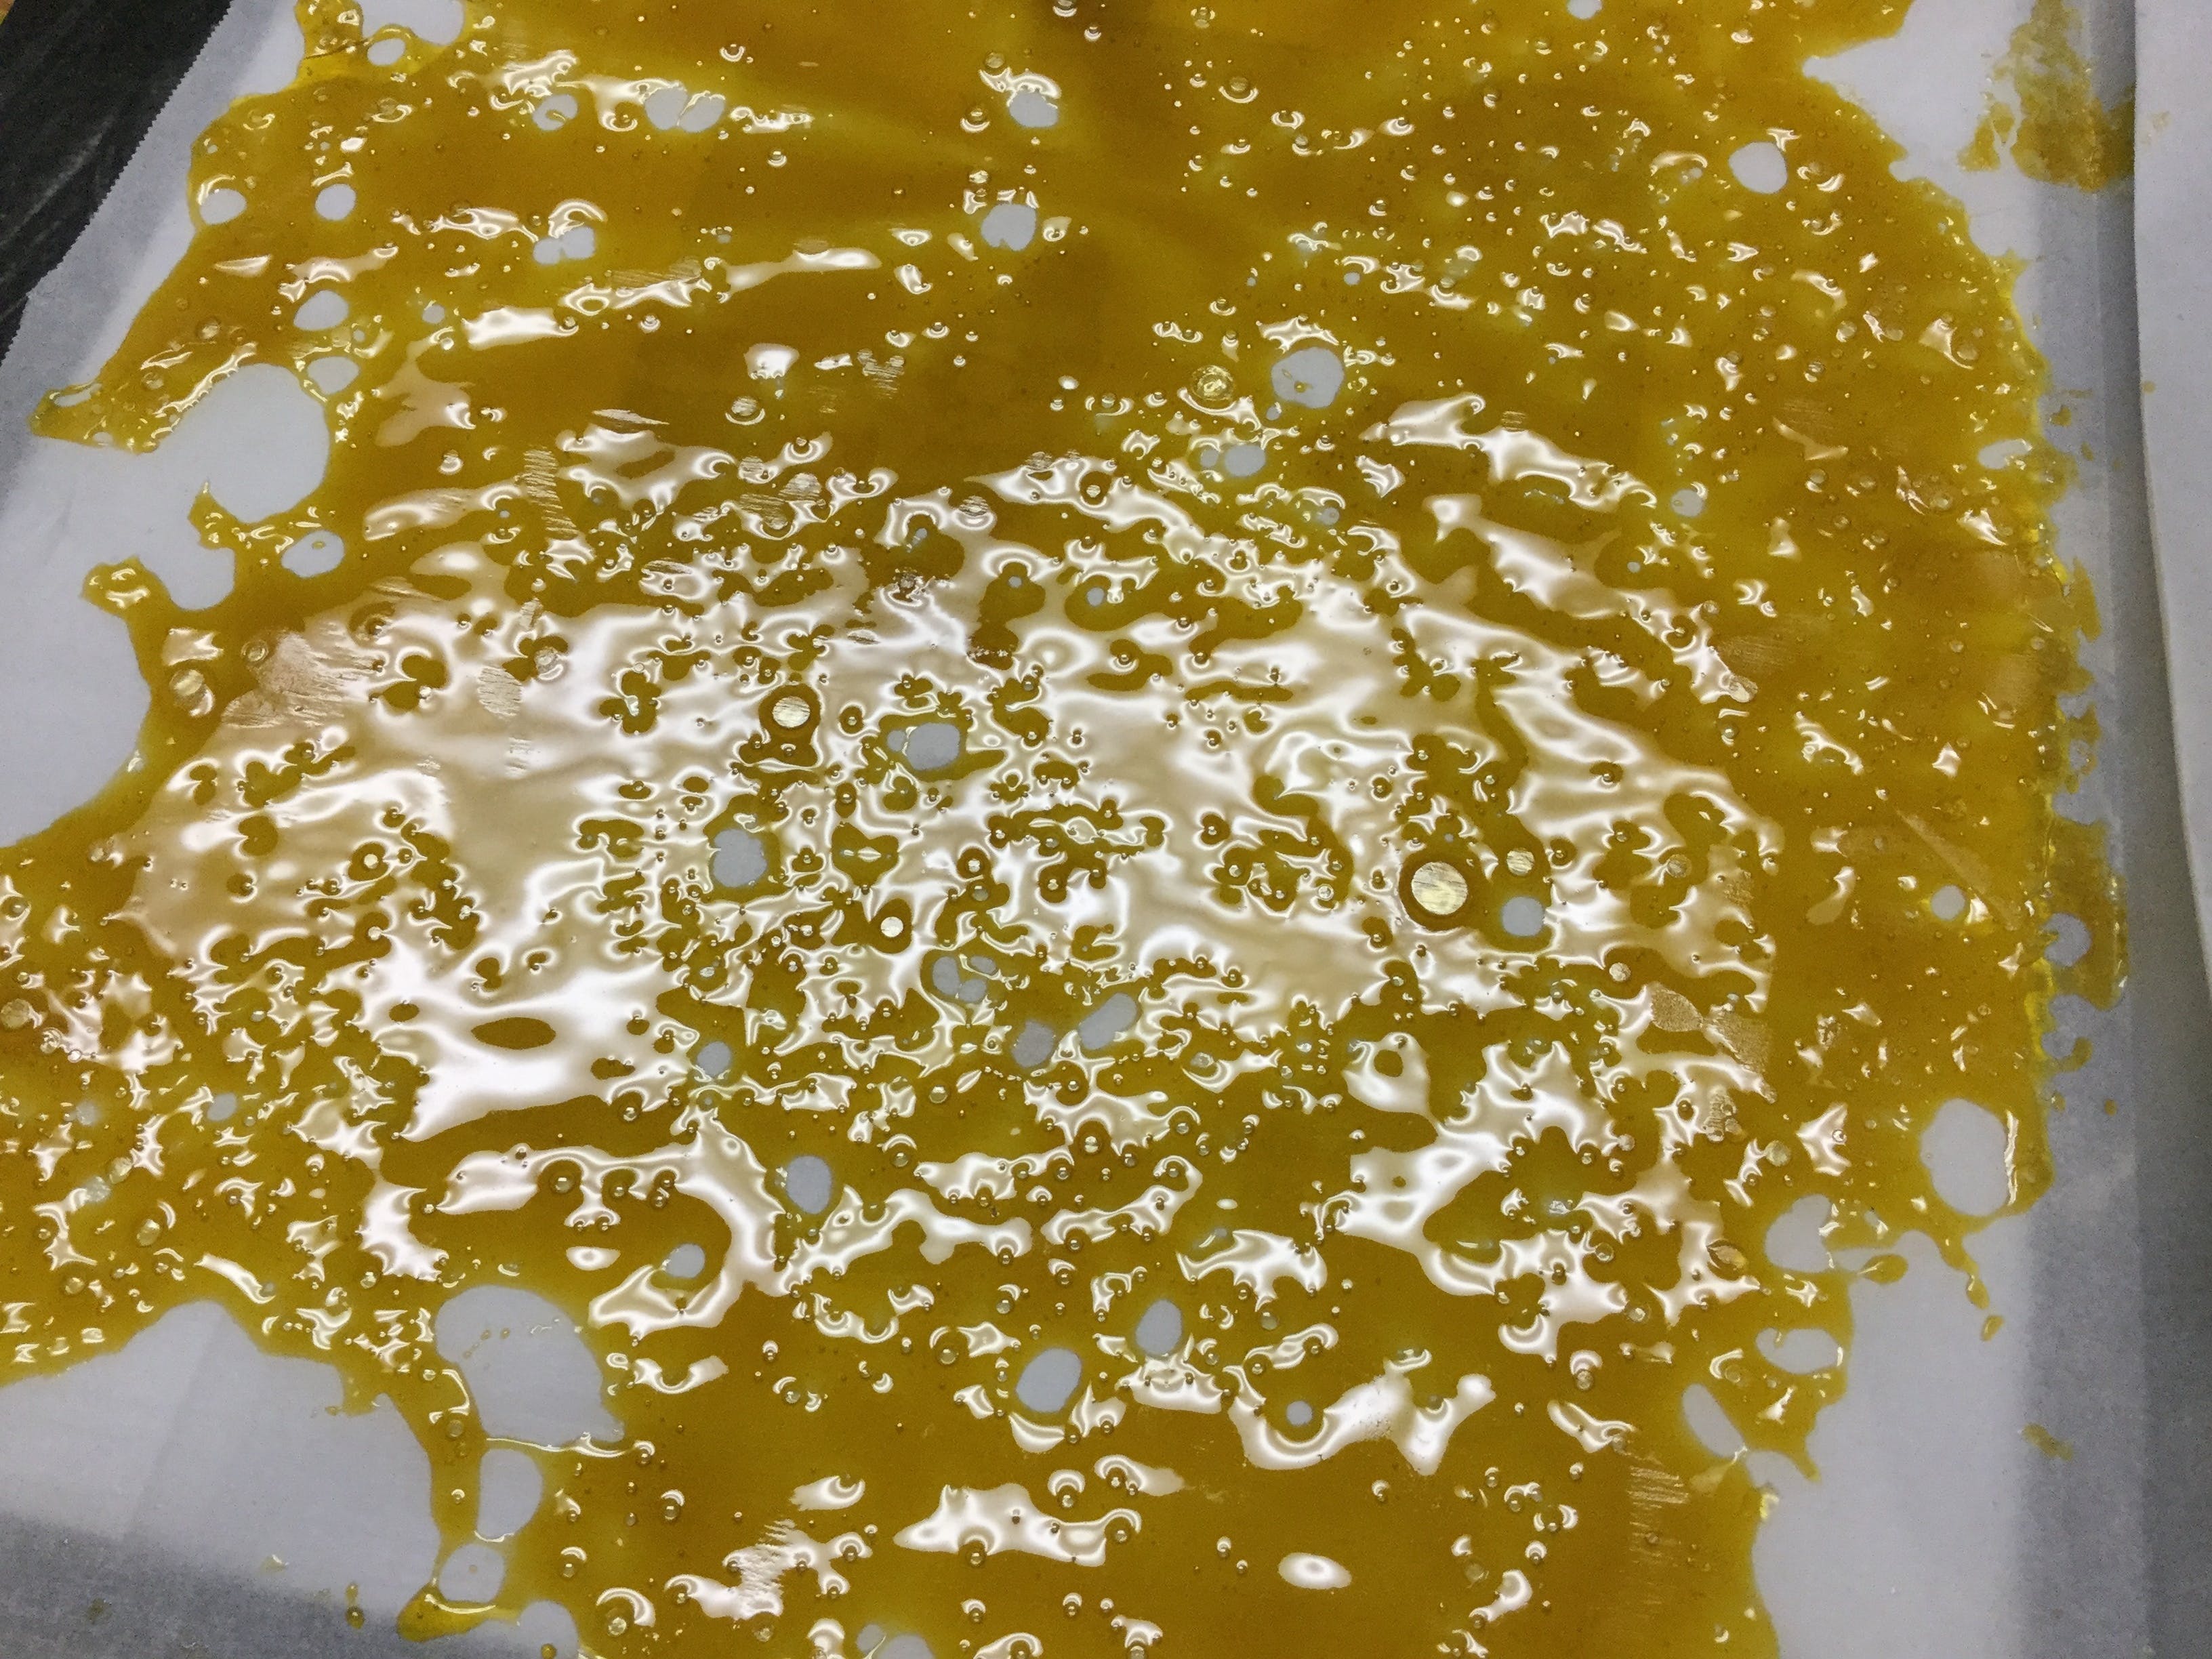 concentrate-hybrid-concentrate